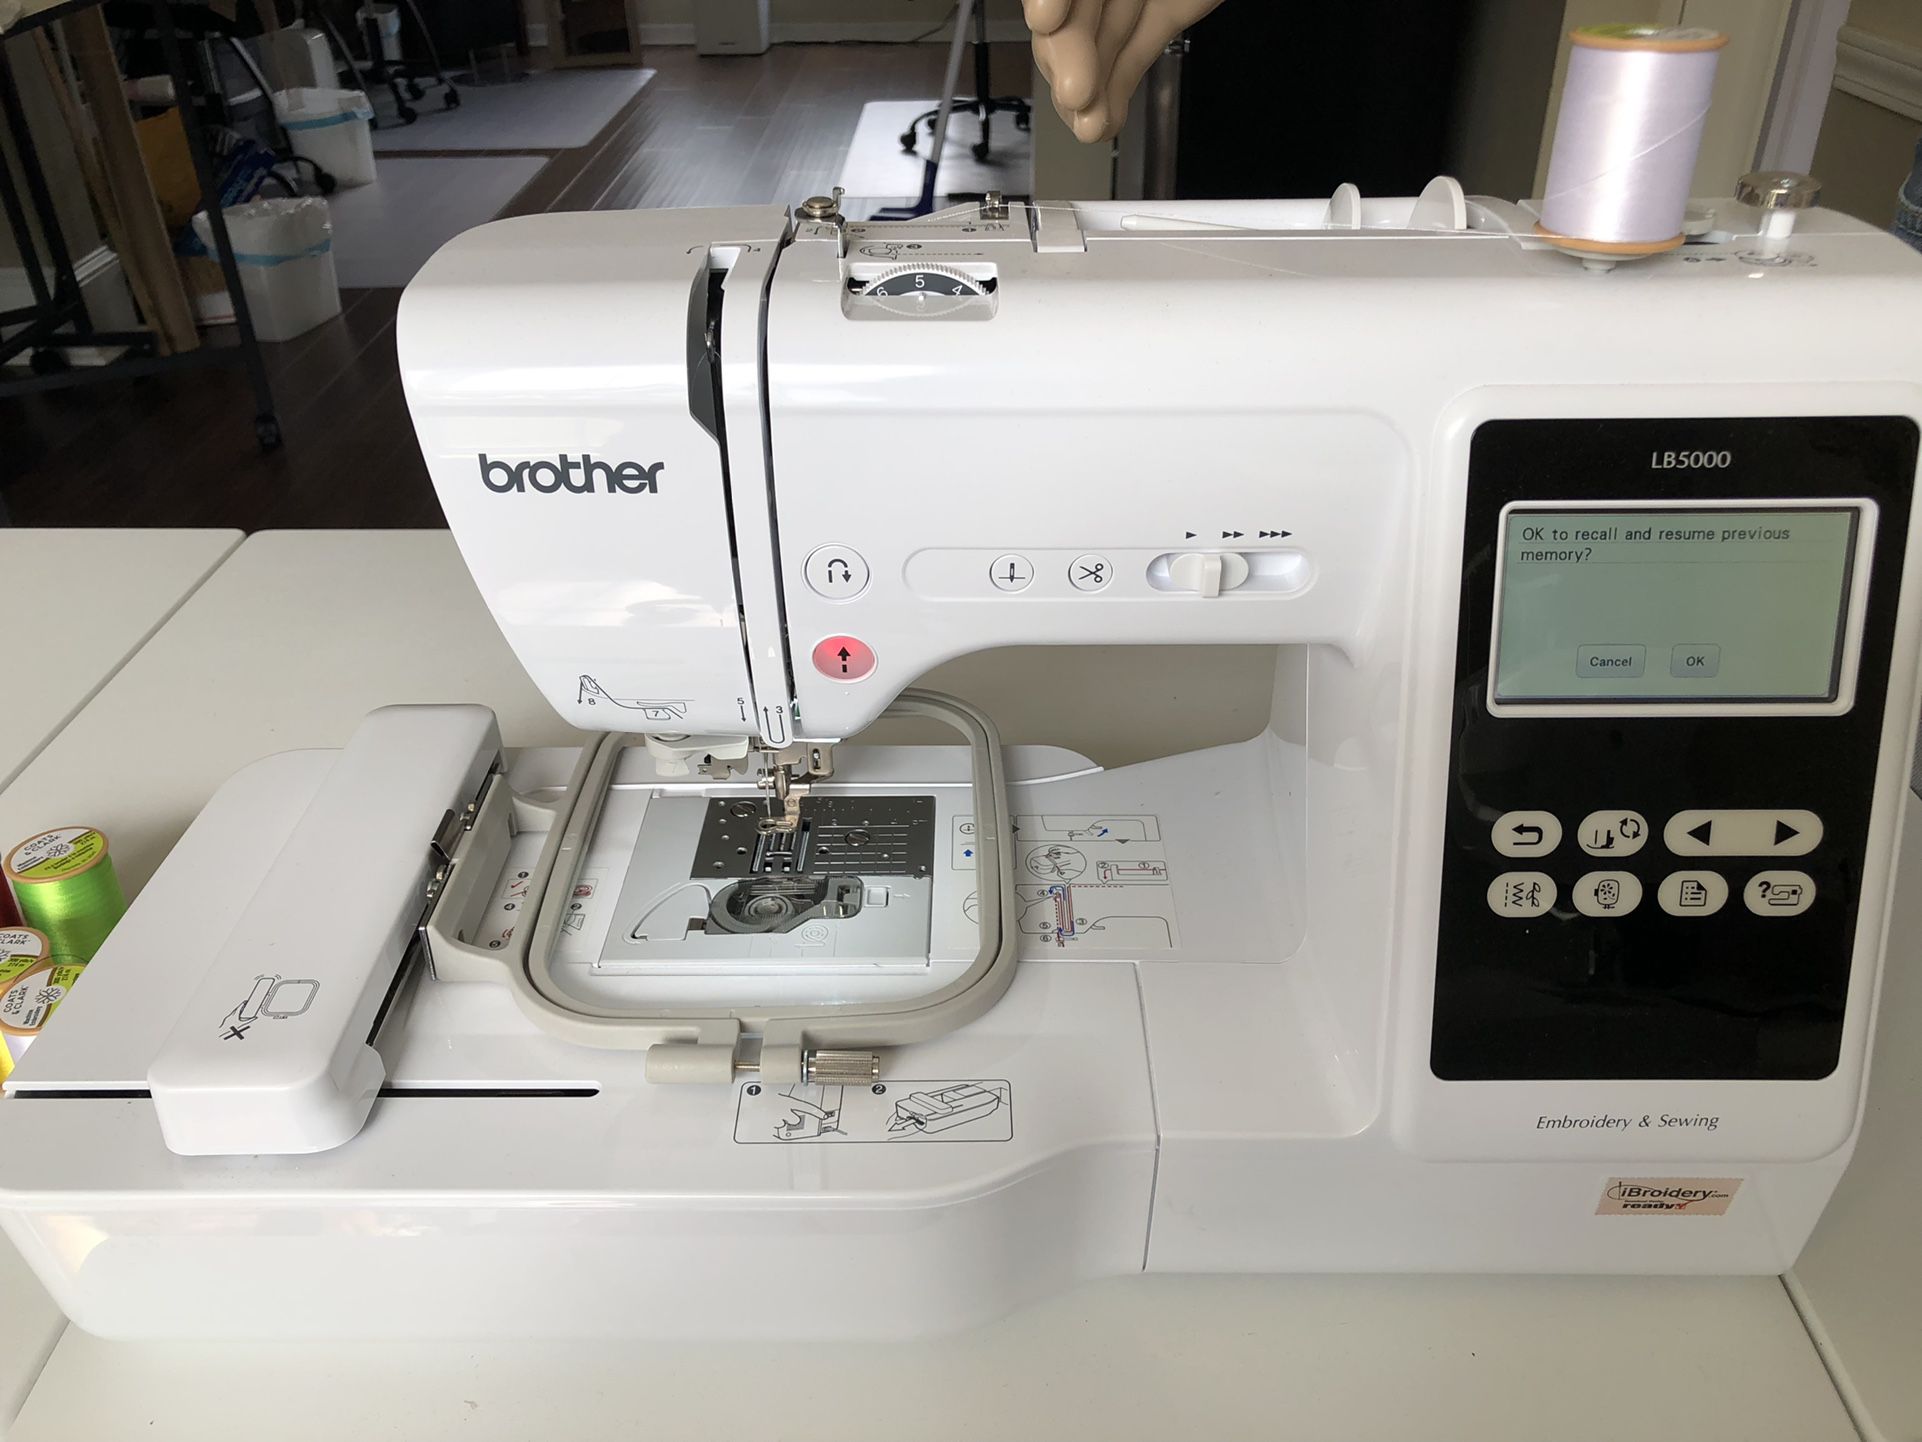 Digital Embroidery Machine, Brother LB5000 for Sale in Stockbridge